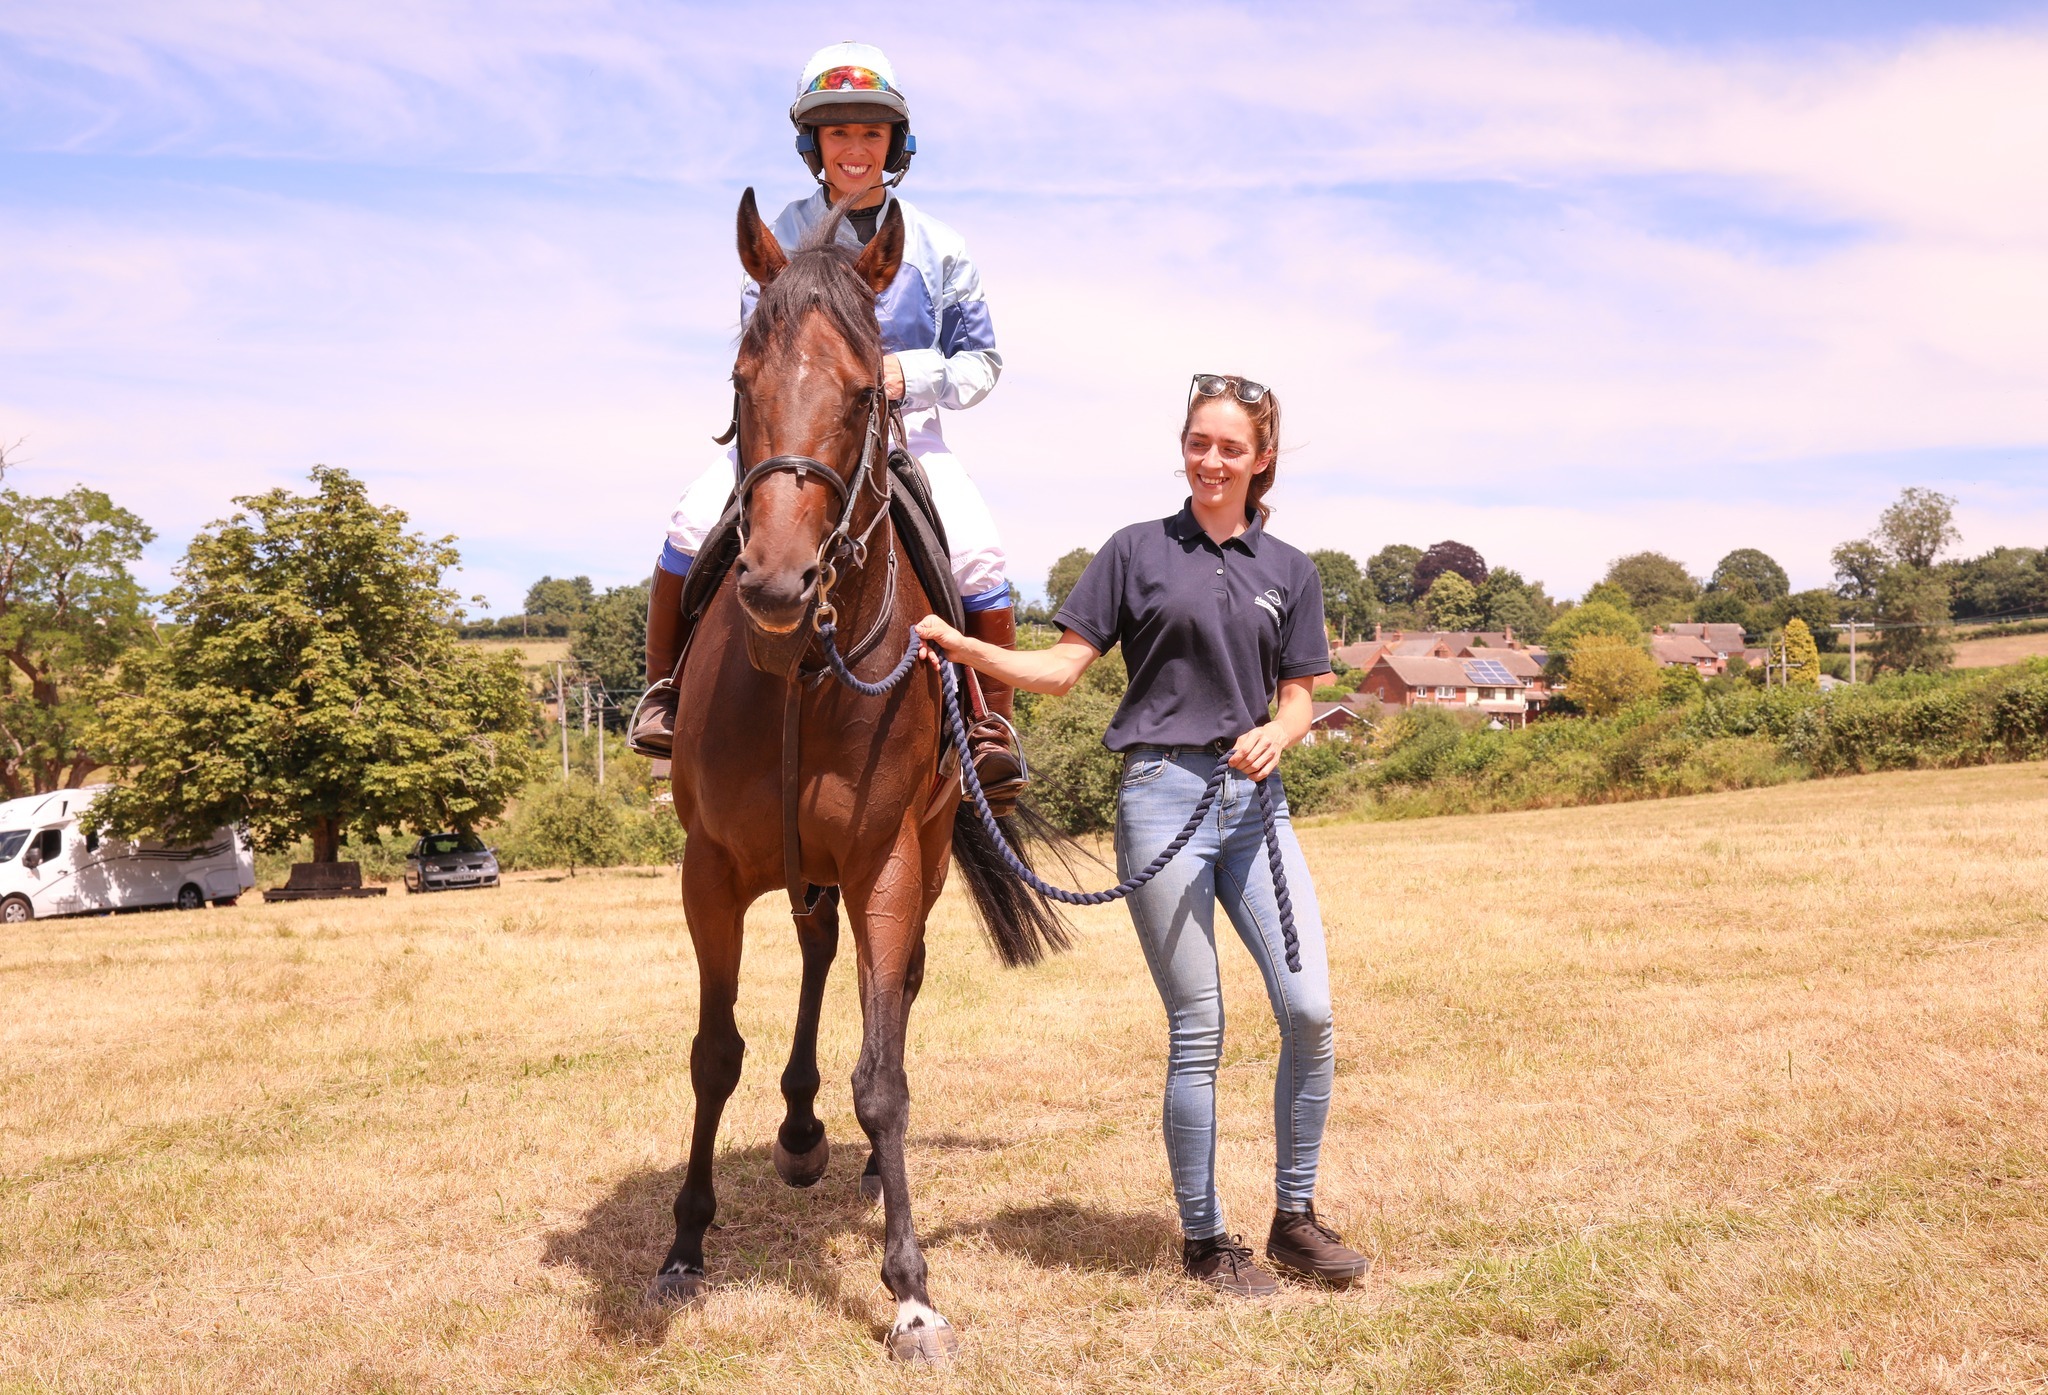 Racehorse Violette Szabo with jockey Faye McManoman at the 100th anniversary celebrations of the spy. Picture: Will Dallimore/Tewkesbury YMCA Movie Makers